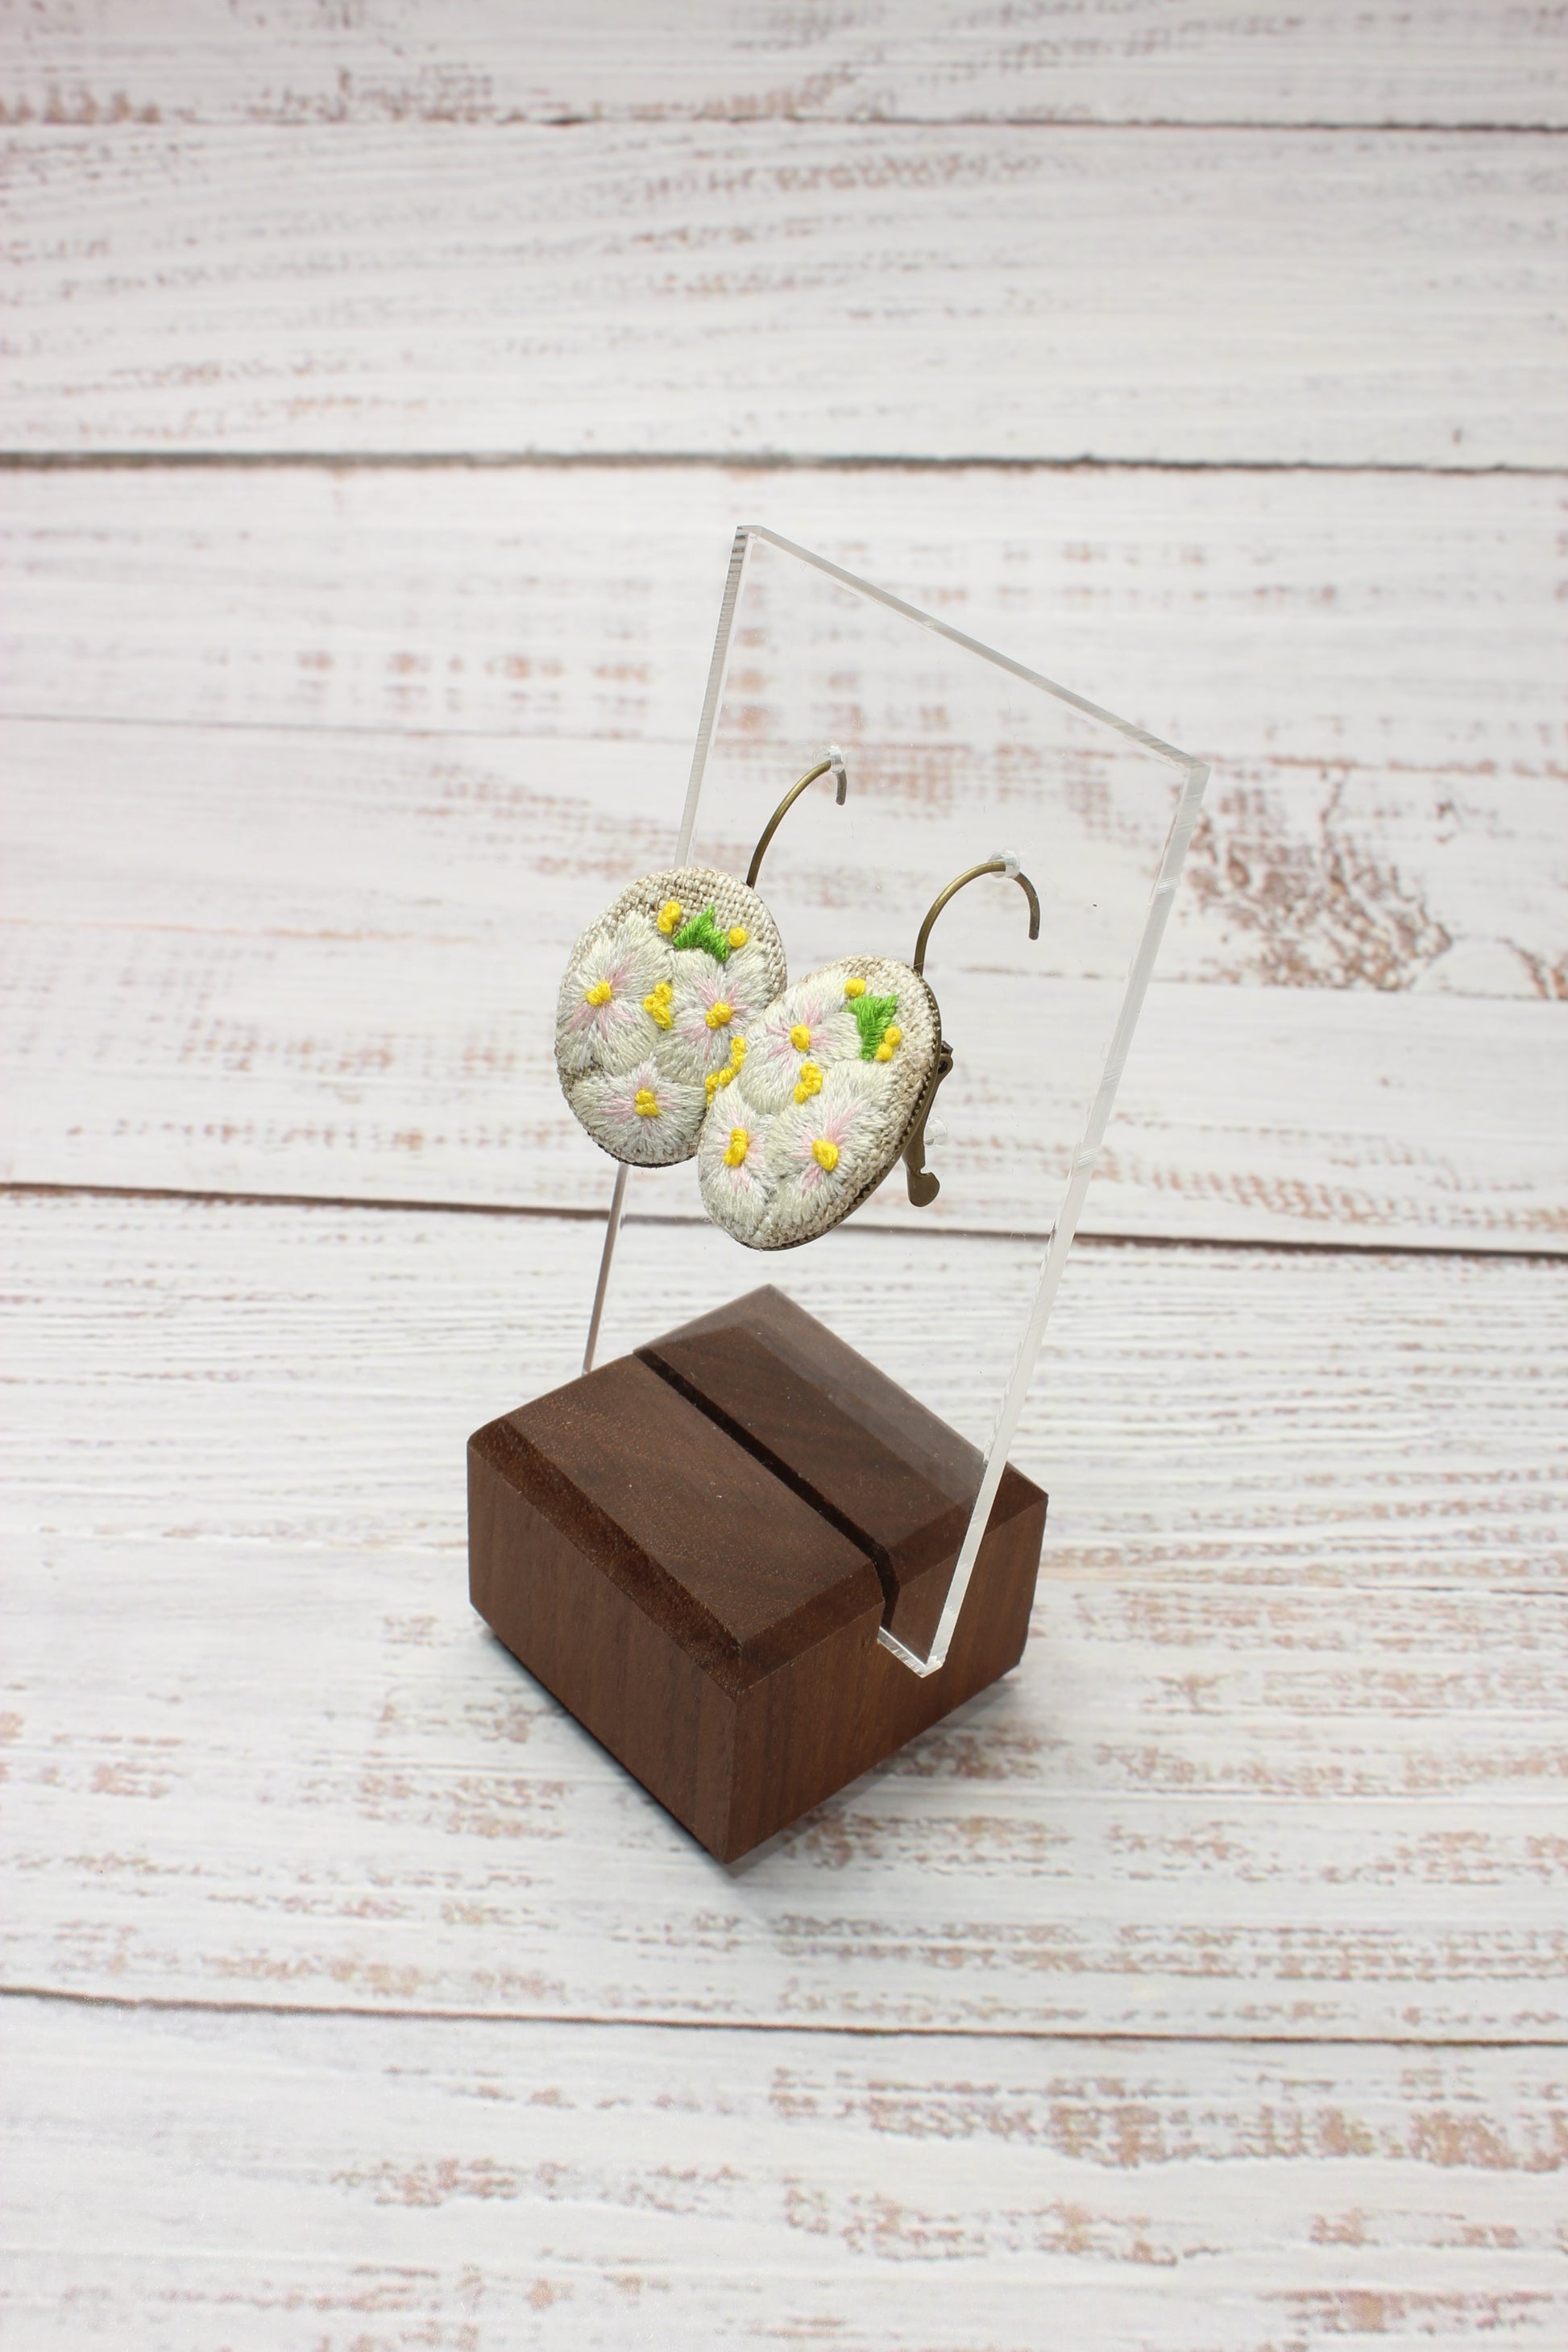 Embroidery White Pansies Wire Earrings